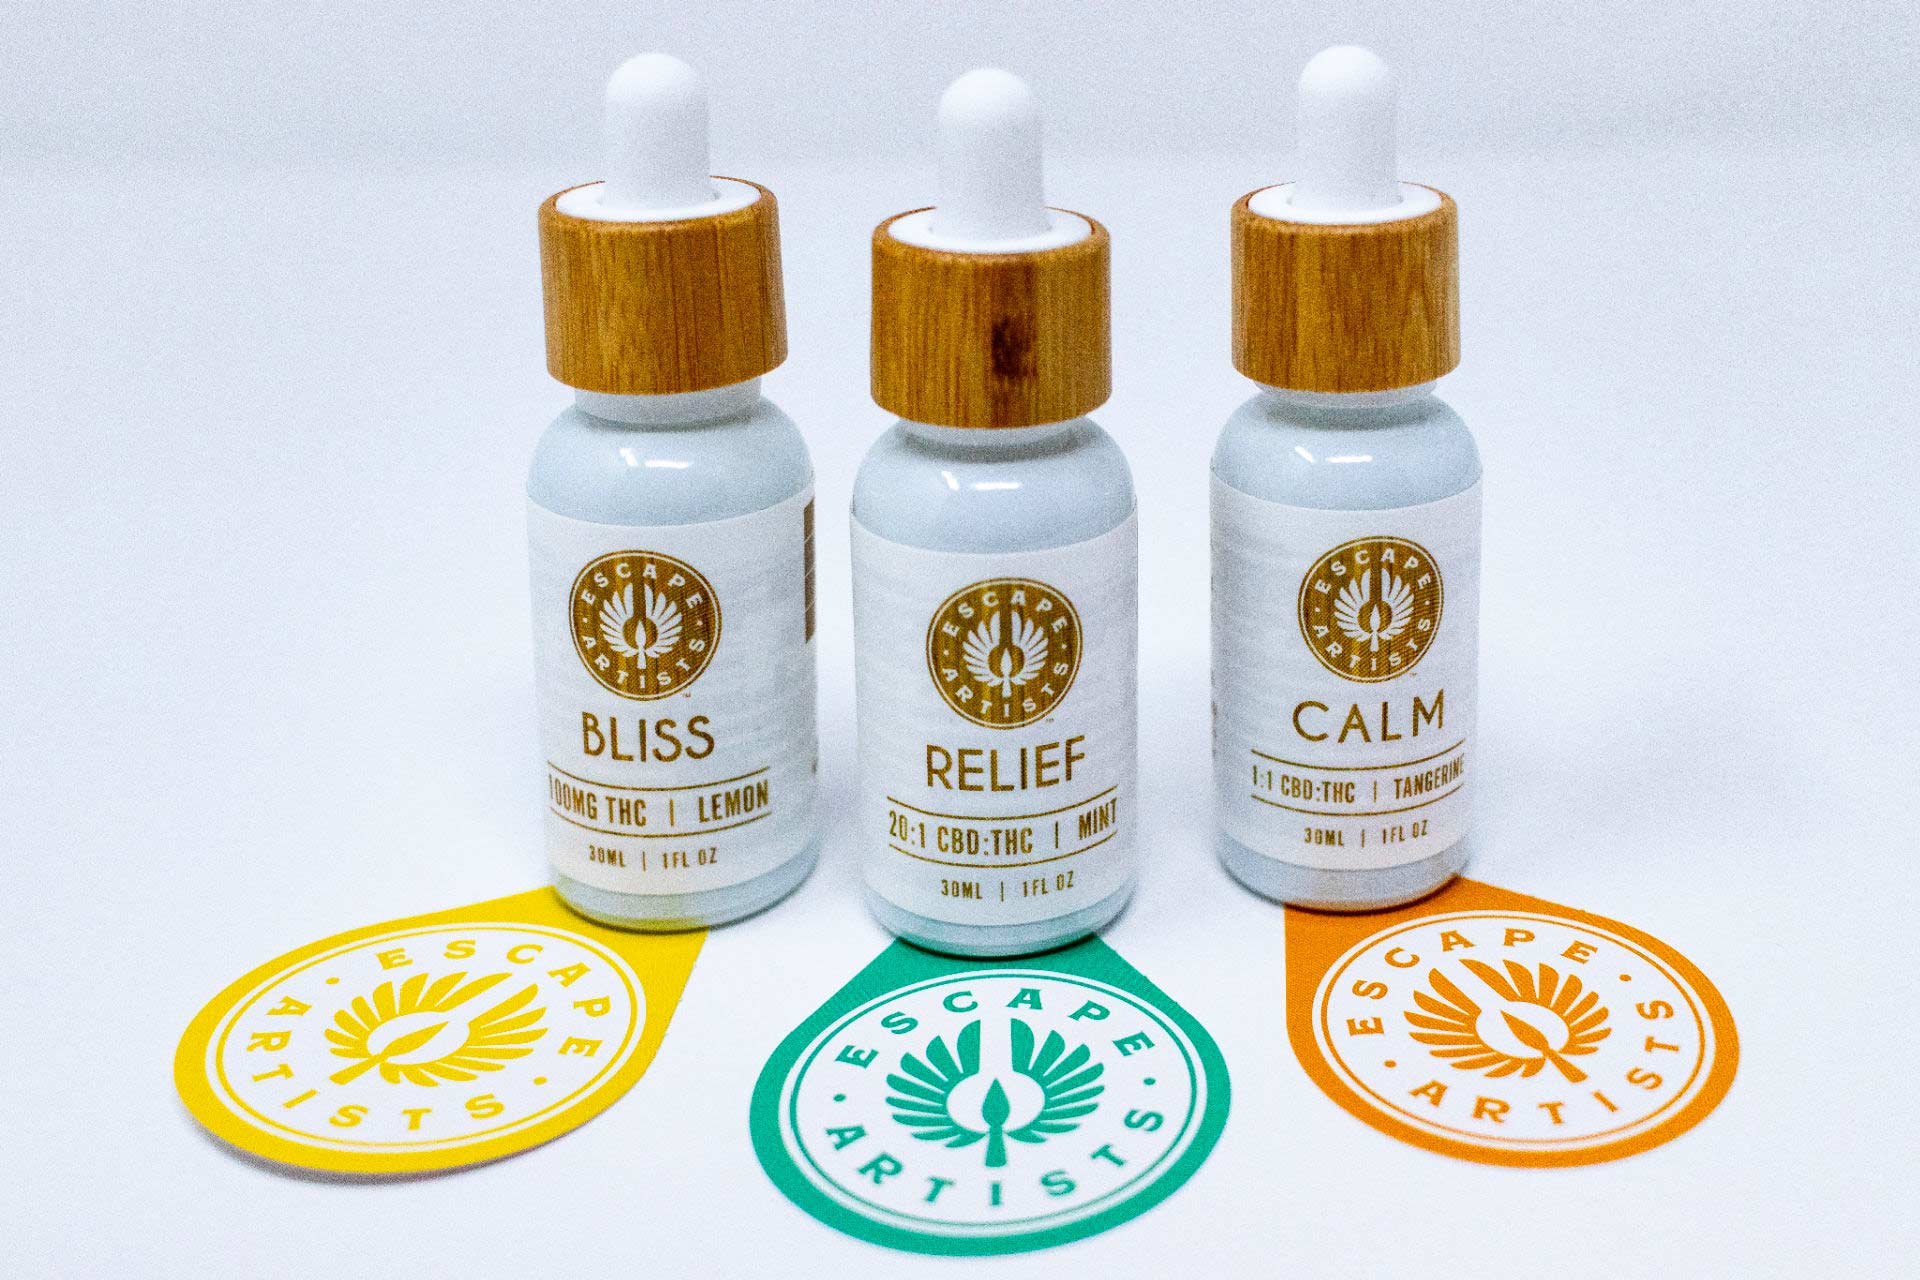 Escape Artist cannabis tincture bottles for their Bliss, Relief and Calm blends.